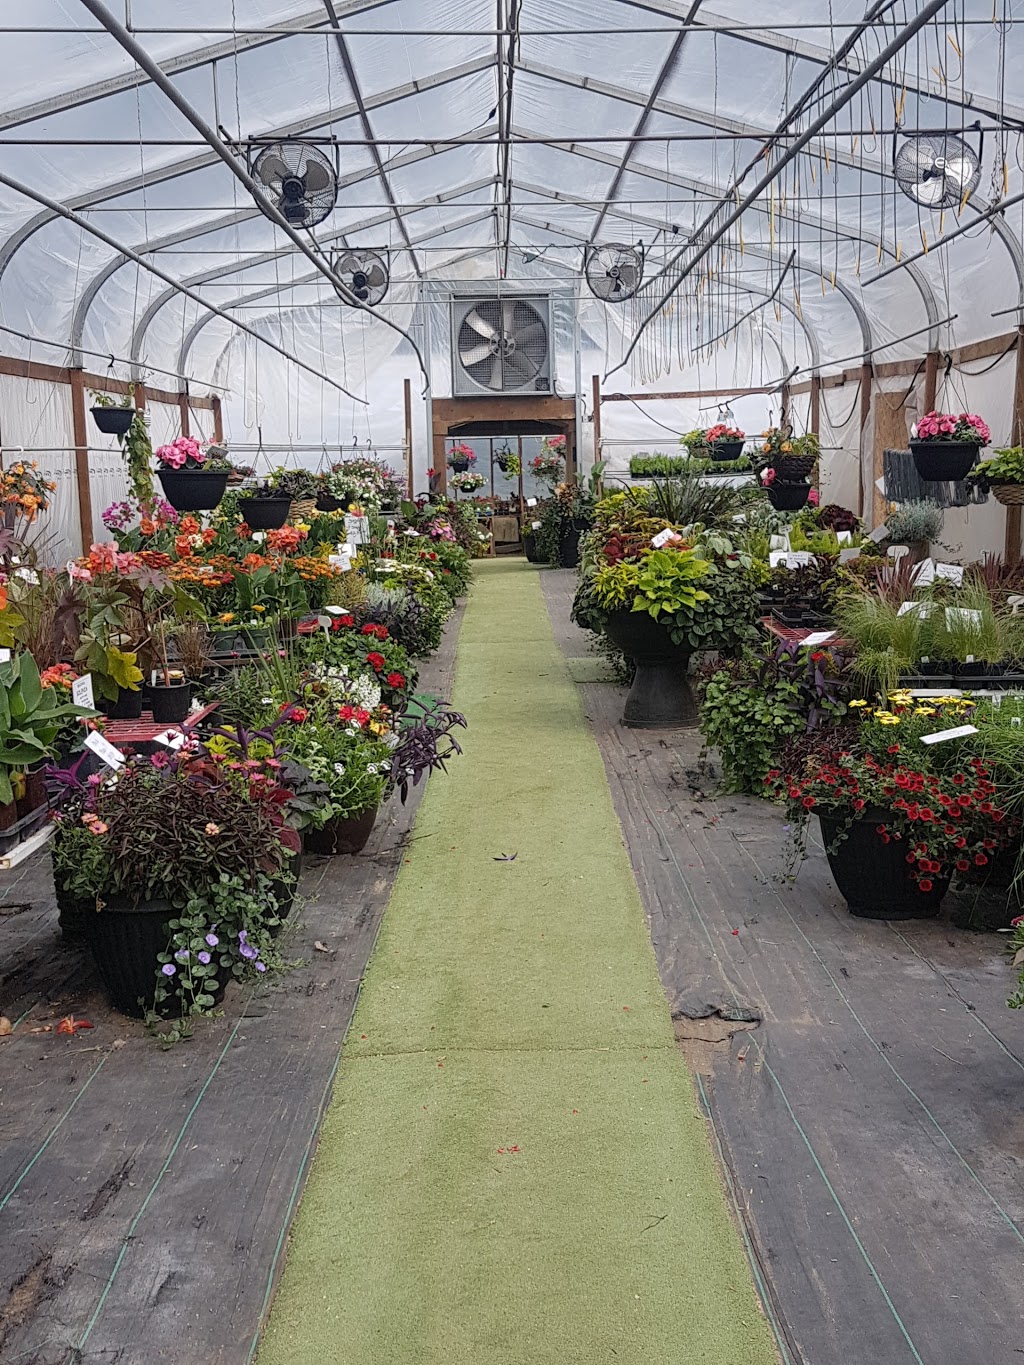 Mother Earth Greenhouses | Daisy Lane South, Clavet, SK S0K 0Y0, Canada | Phone: (306) 931-4133